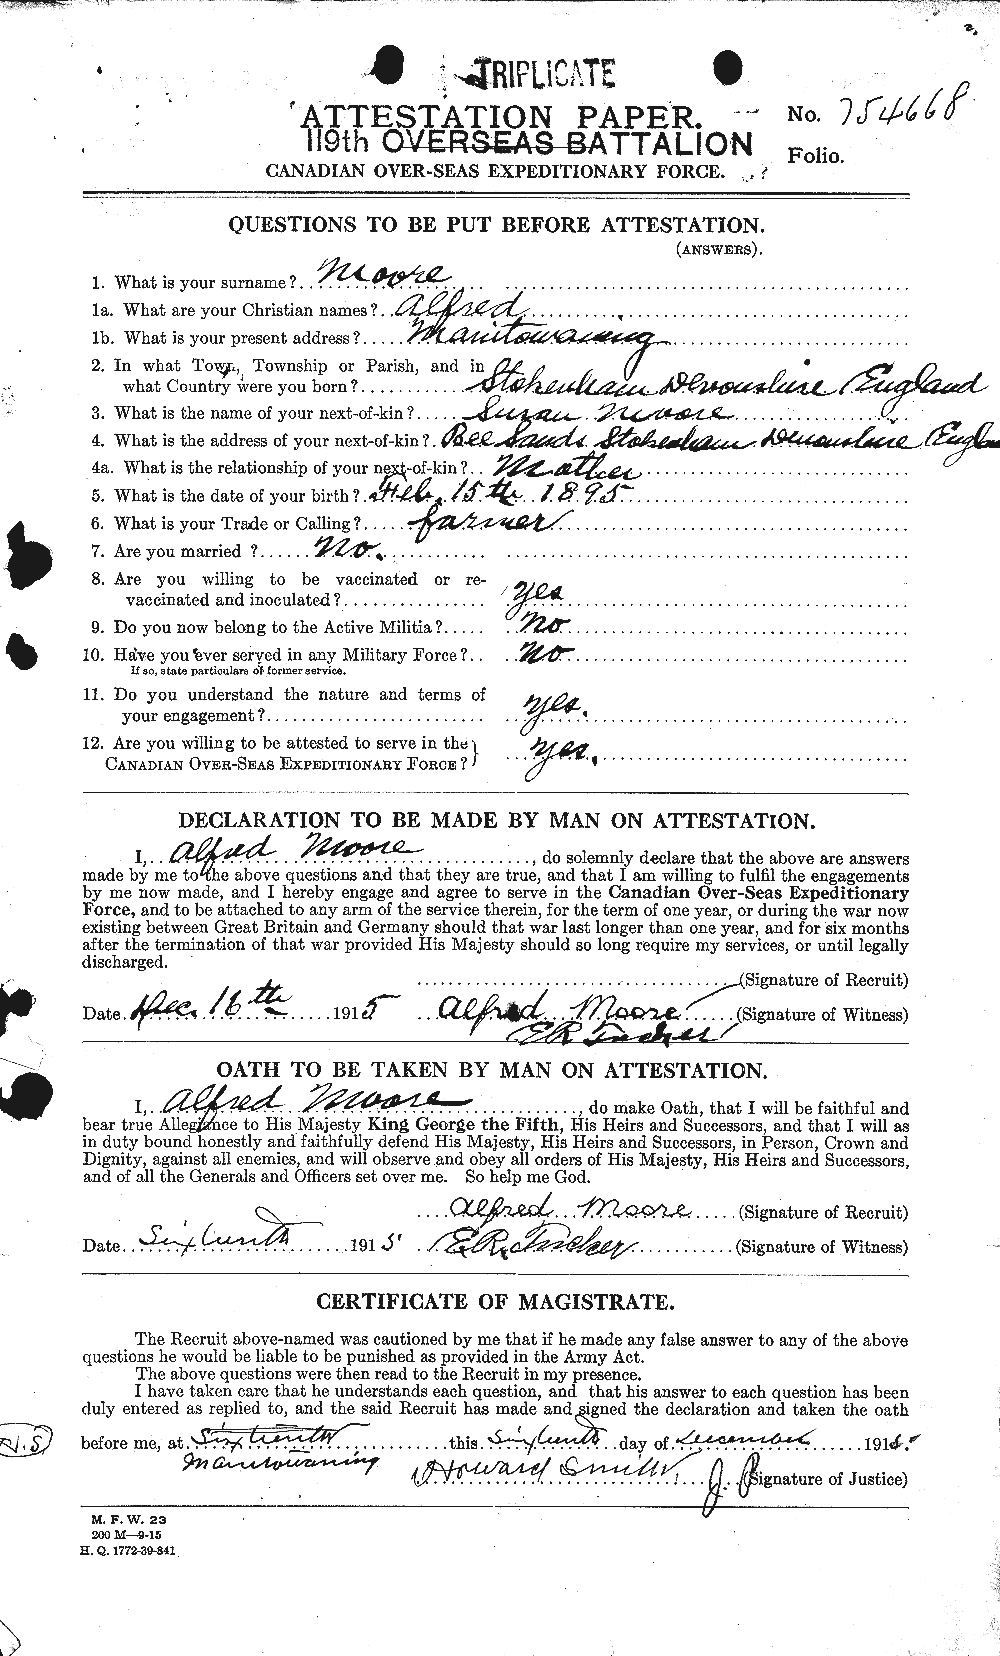 Personnel Records of the First World War - CEF 506386a